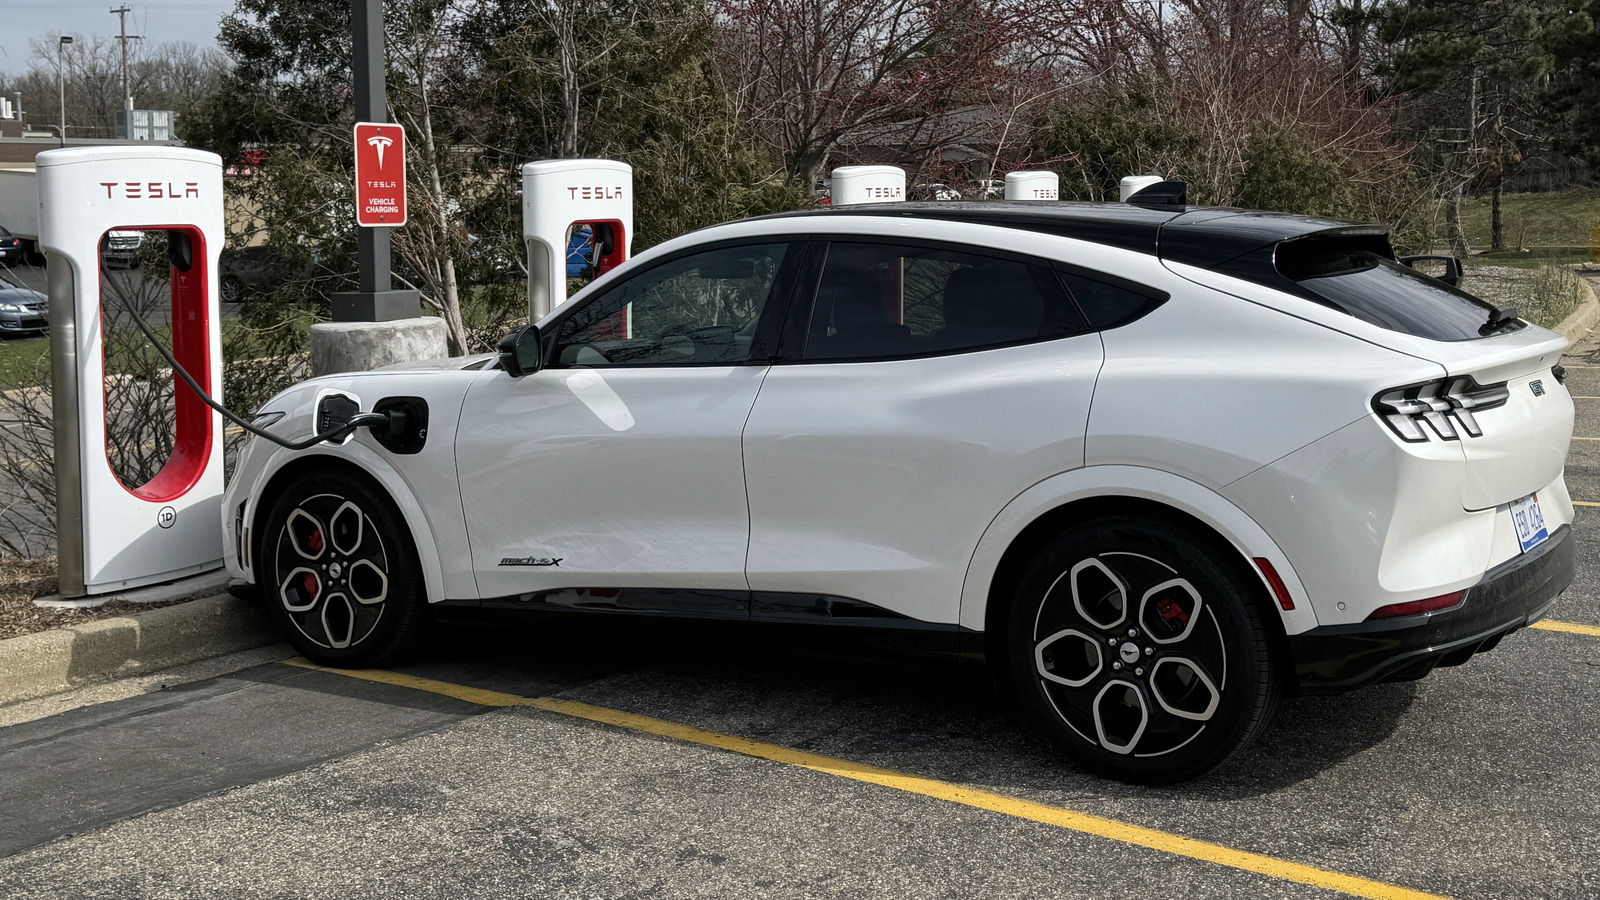 I Took A Ford EV To A Tesla Supercharger: Here's What Worked And What Didn't